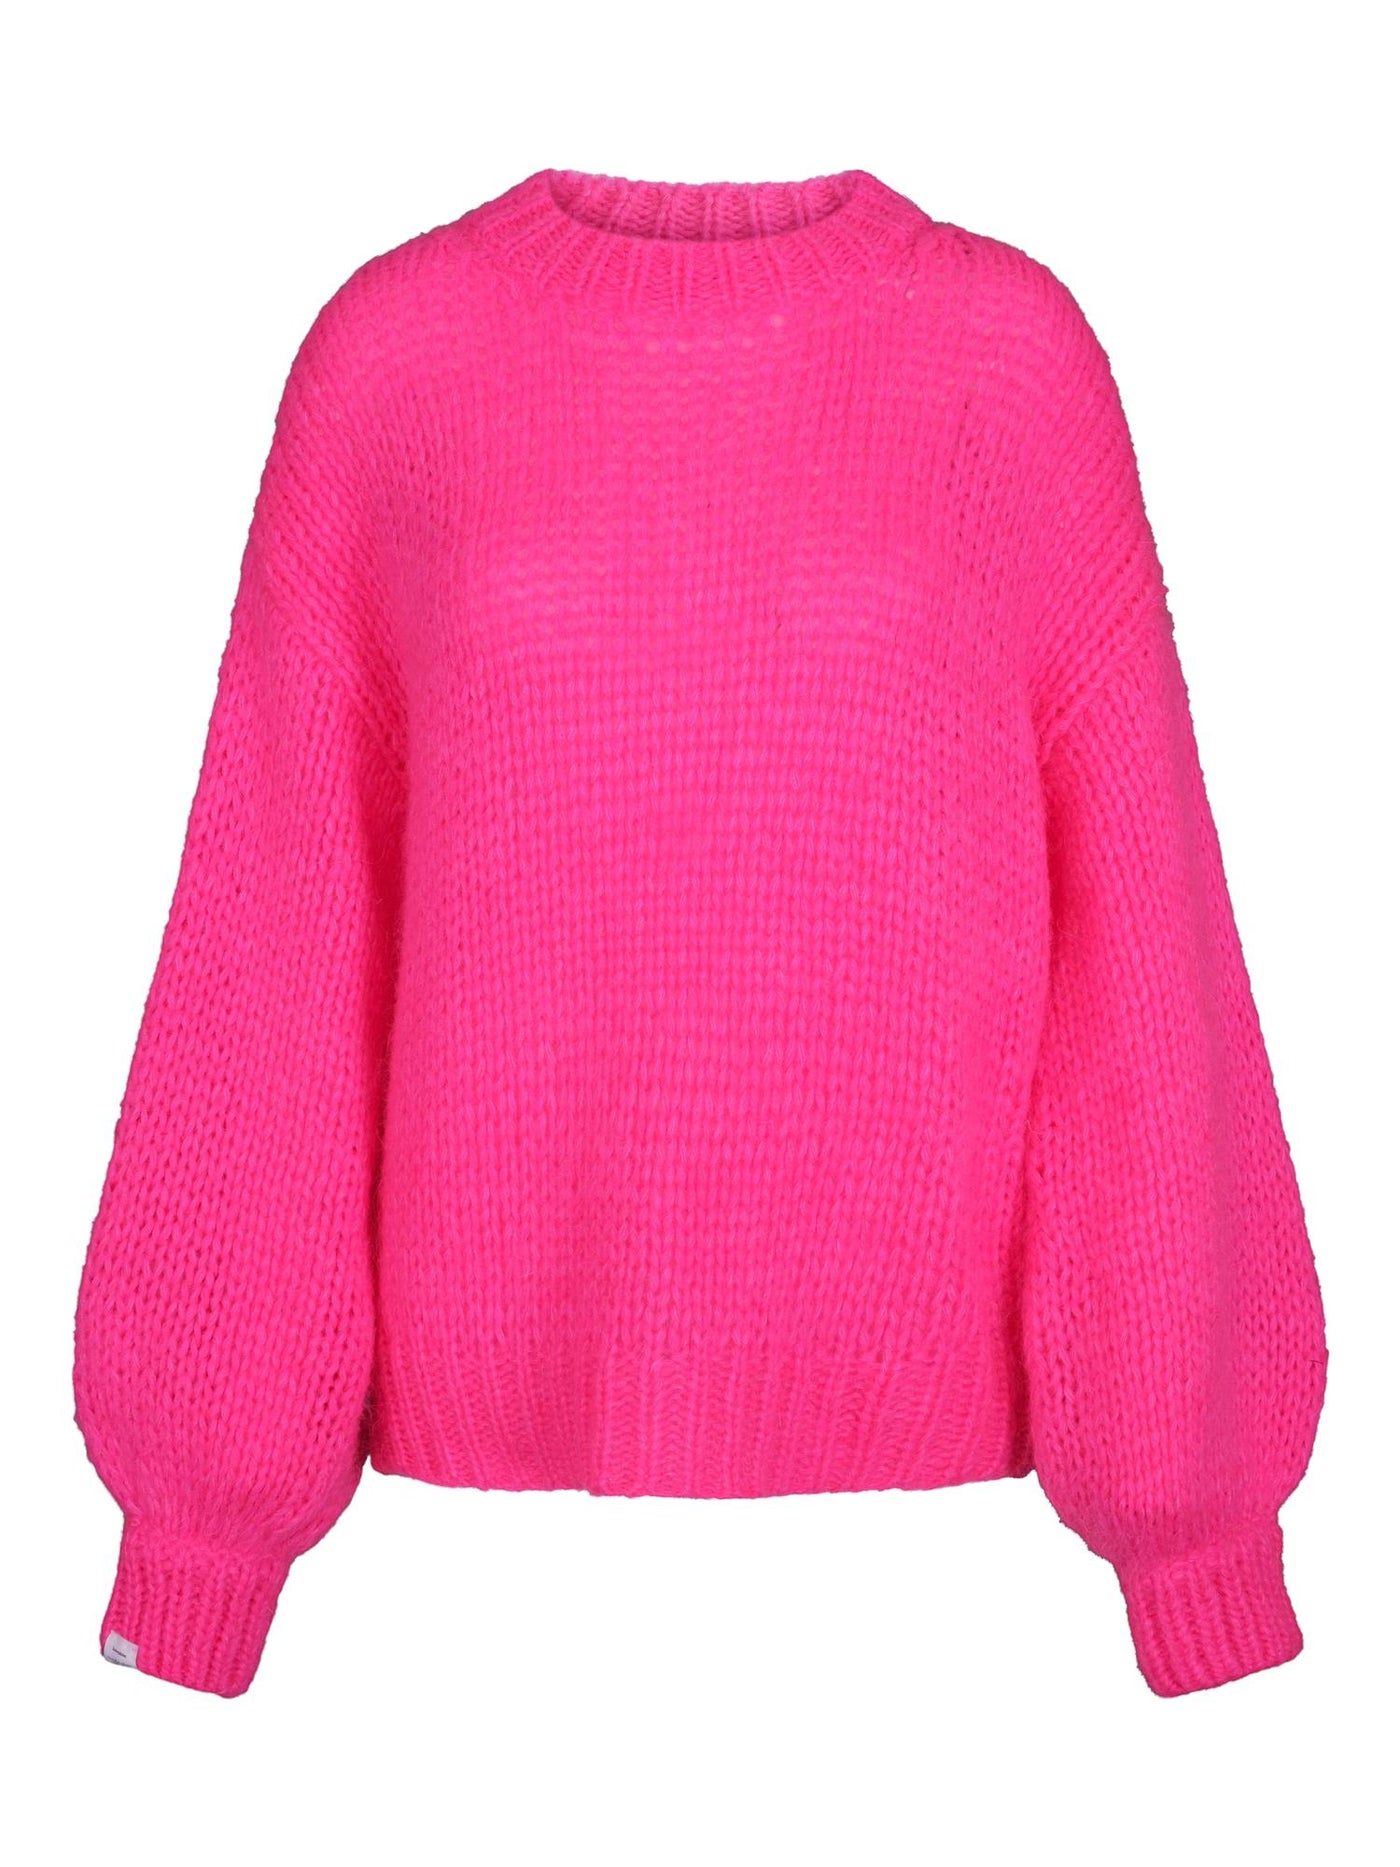 Florie RN Sweater